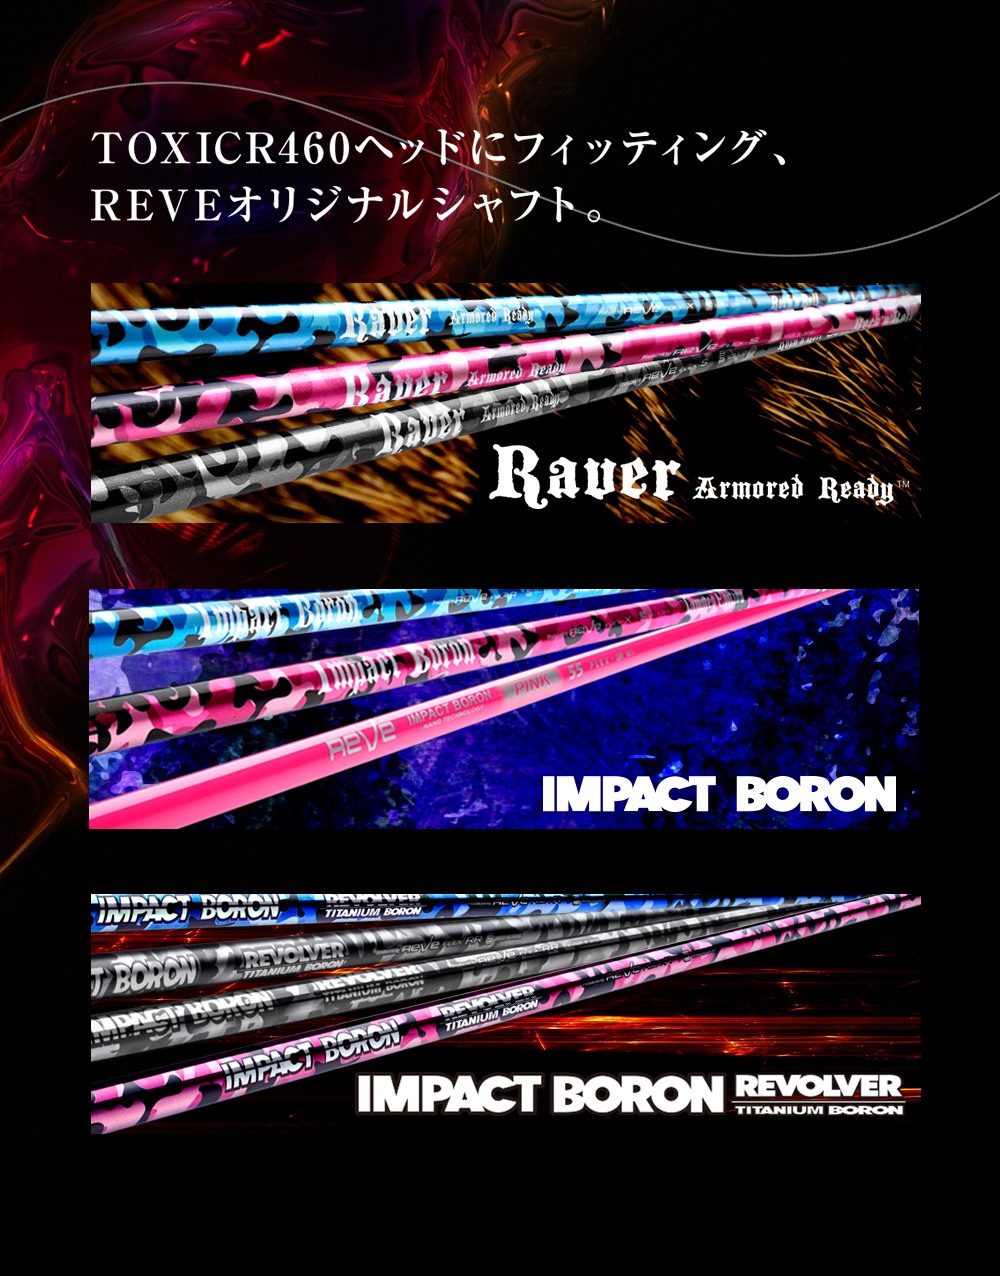 Reve TOXIC R460/Raver Armored Ready 60Xクラブ - mirabellor.com